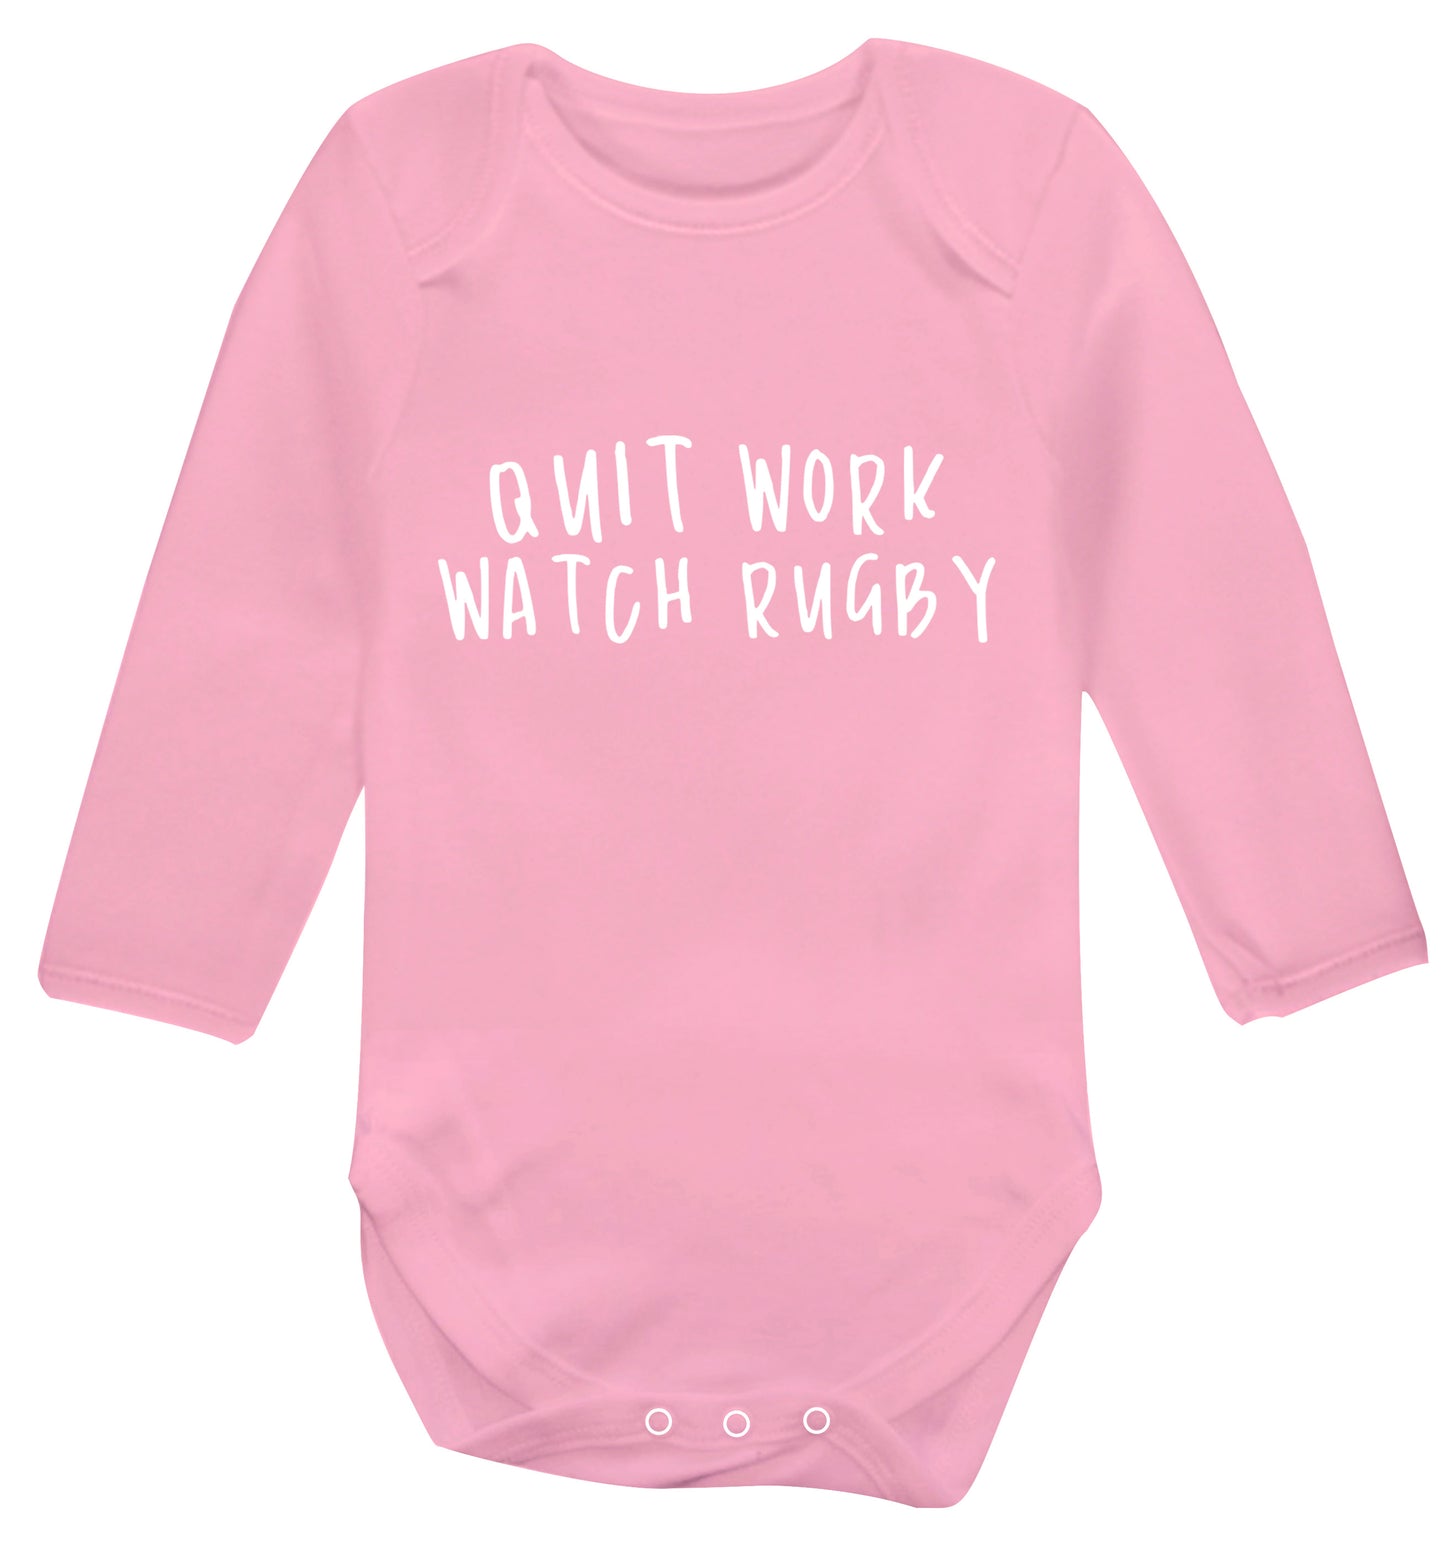 Quit work watch rugby Baby Vest long sleeved pale pink 6-12 months